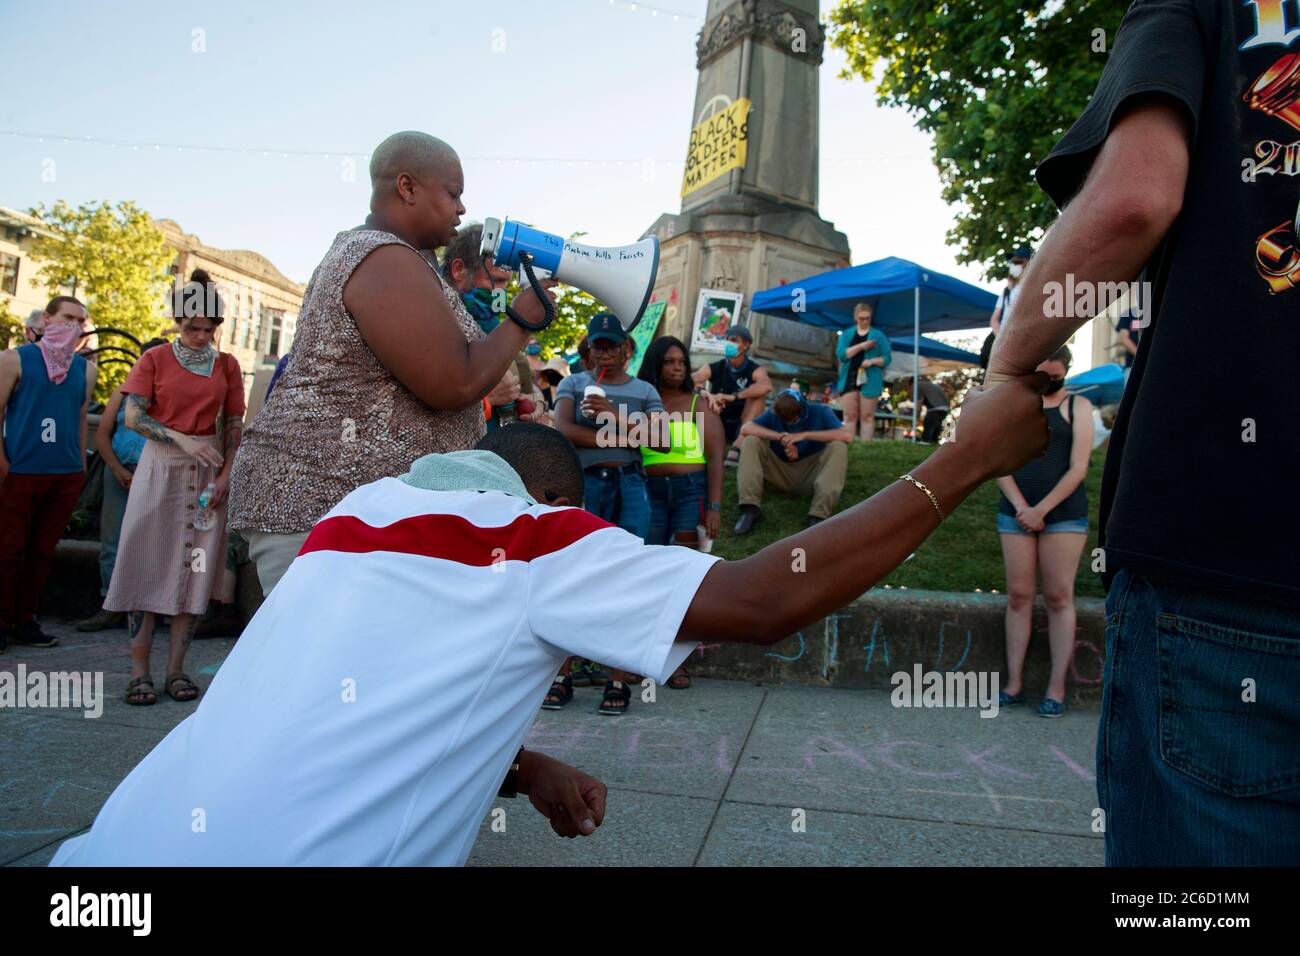 Bloomington, United States. 07th June, 2020. Reverend Angela Carter, left, says some words for Big Mike (Michael Parker) during a vigil for BLM activist Big Mike (Michael Parker), who was shot and killed early Sunday. Parker had been at the Monroe County Square to protest against the killing of George Floyd, and said he was going to a convenience store to get supplies for the protest, but was shot and killed during an apparent robbery. The protesters heard the shots several blocks away. Credit: SOPA Images Limited/Alamy Live News Stock Photo